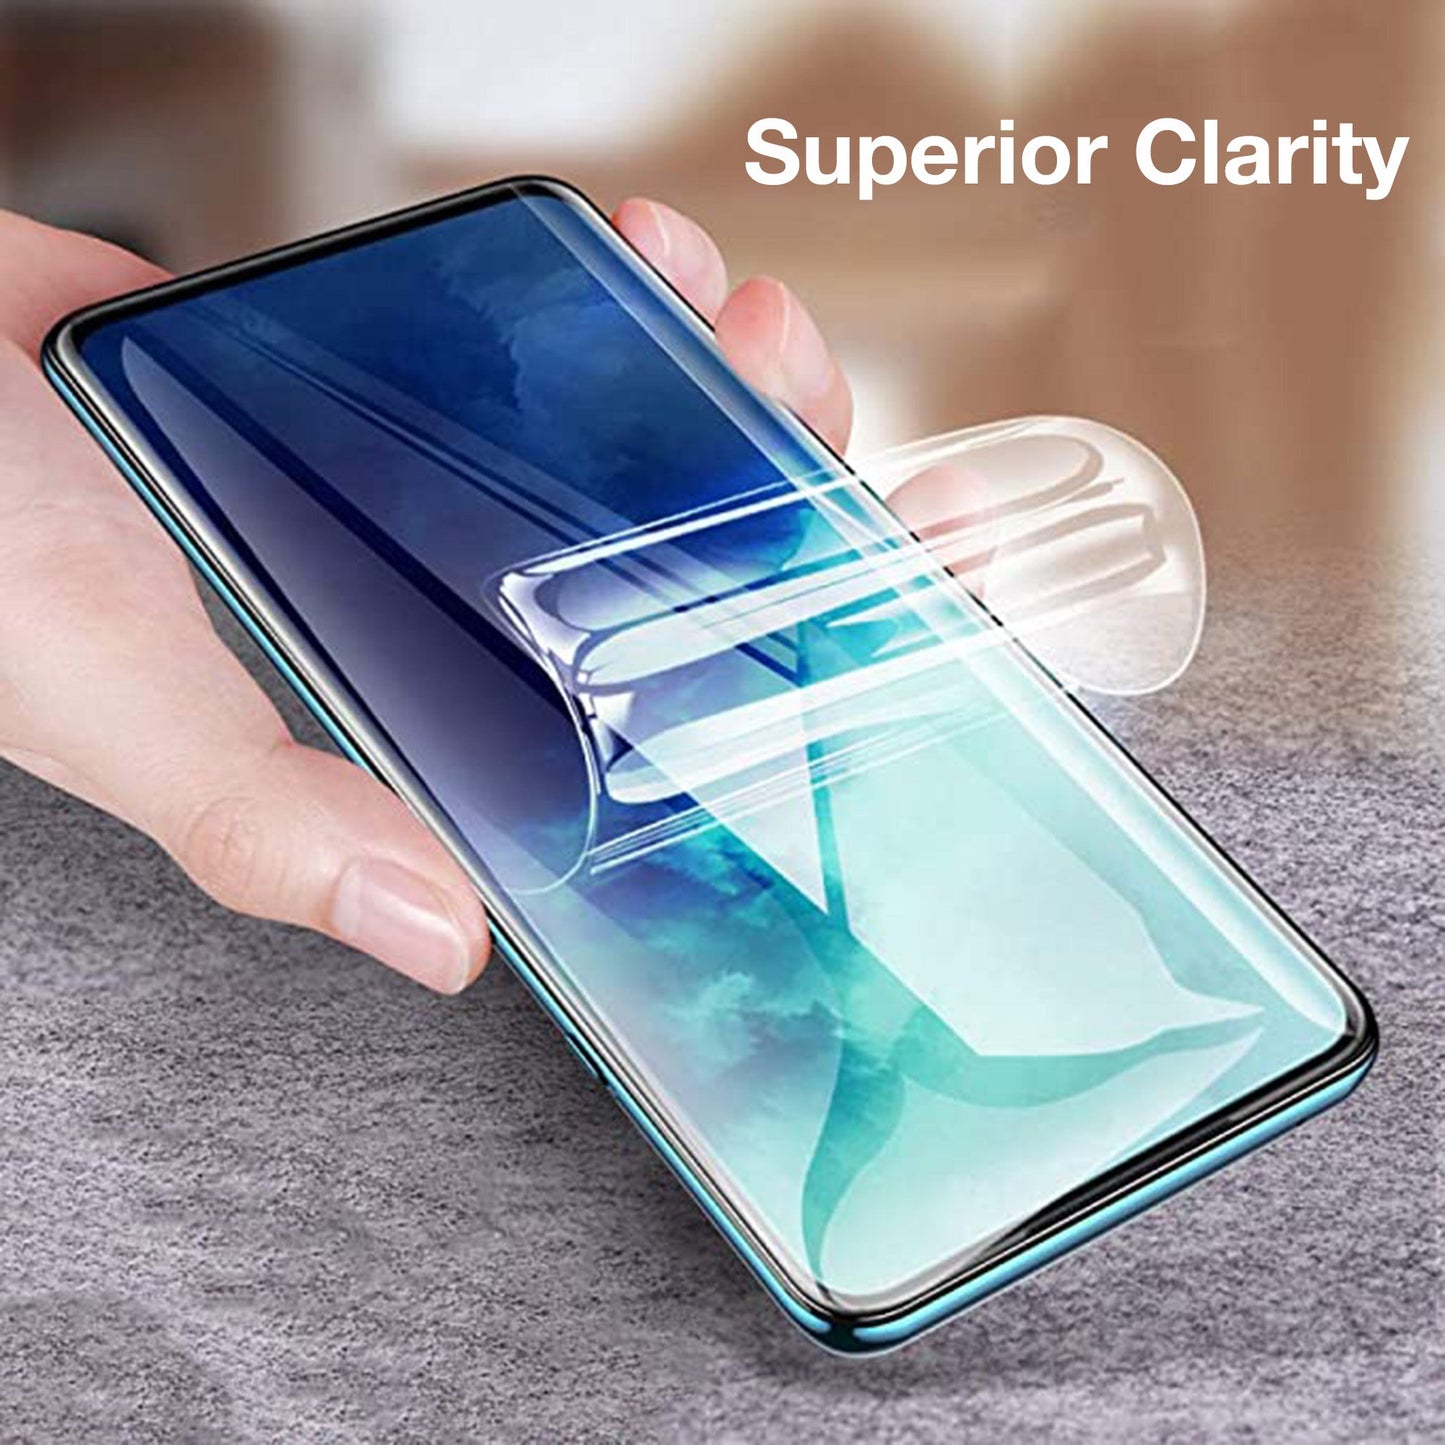 [3 Pack] MEZON Samsung Galaxy A12 Premium Hydrogel Clear Edge-to-Edge Full Coverage Screen Protector Film (Galaxy A12, Hydrogel)